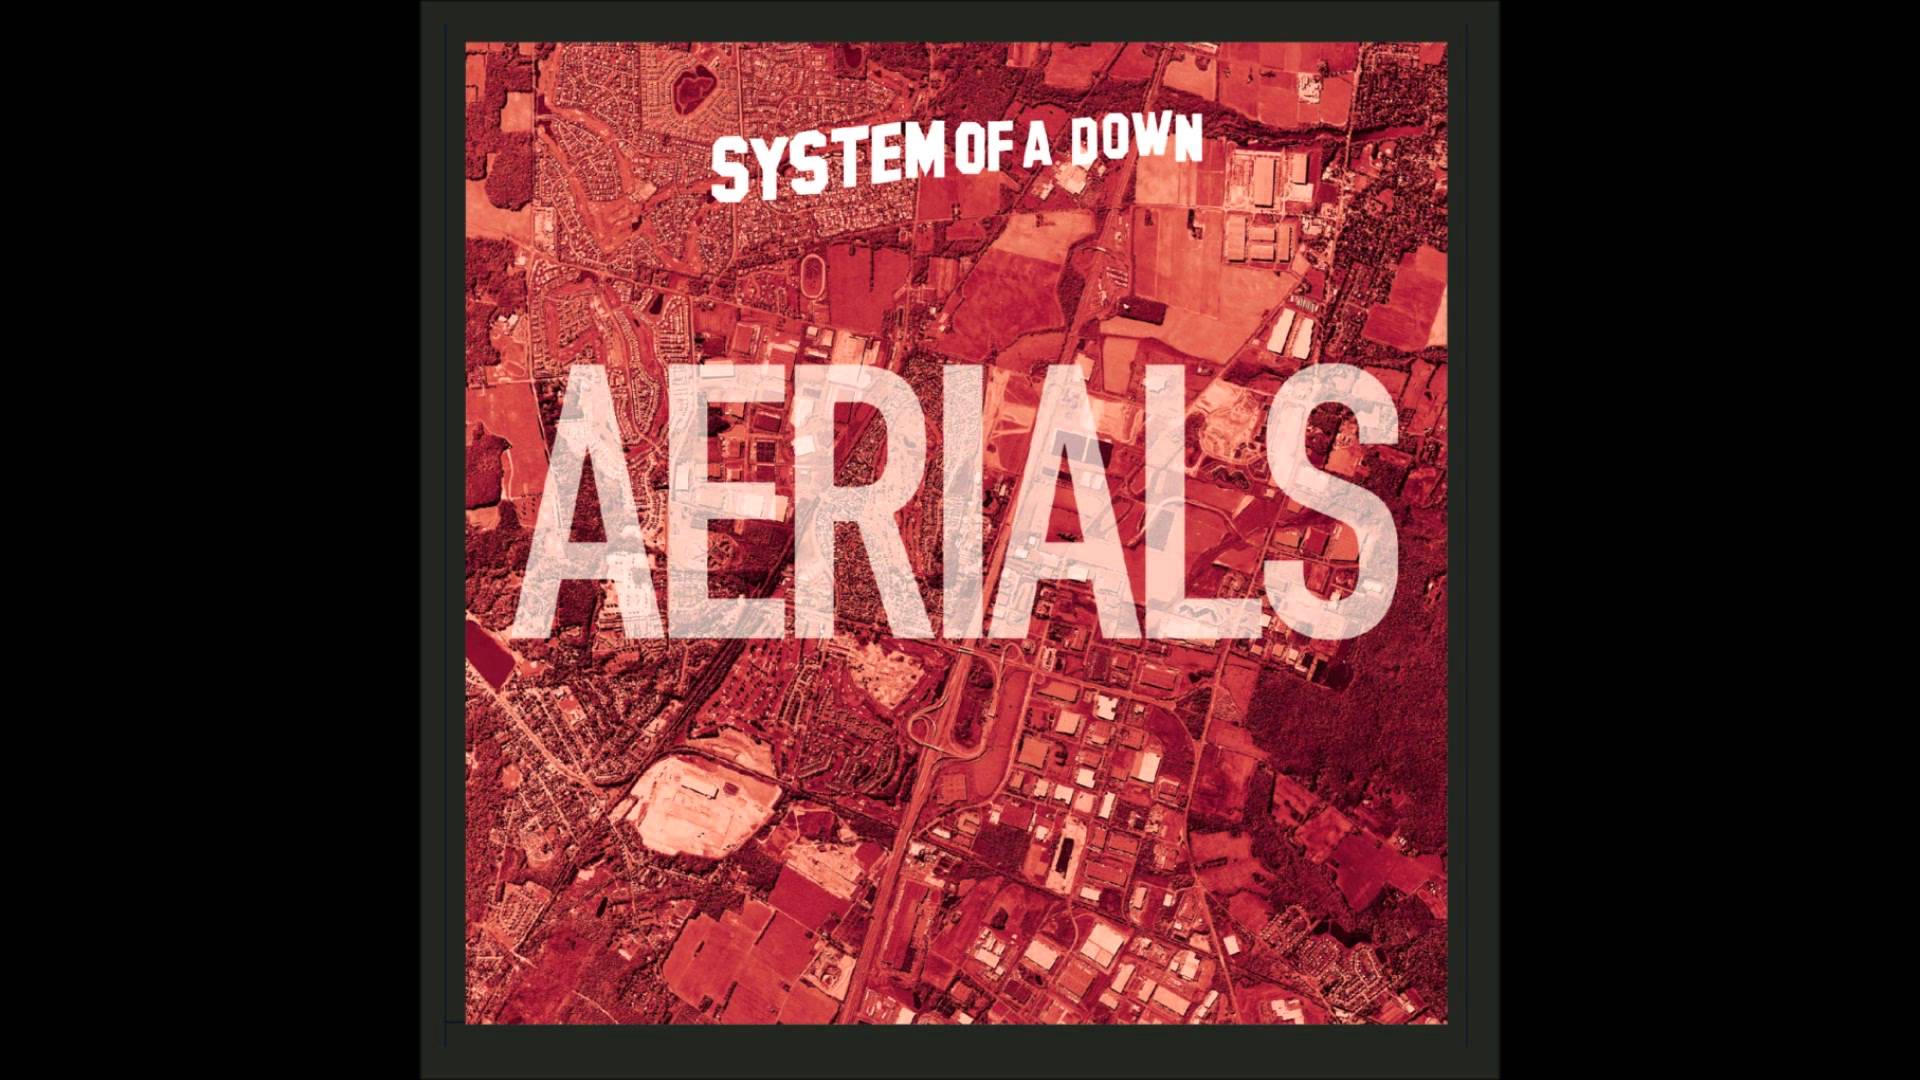 Pink System of a Down Logo - System of a Down: Aerials (Video 2002) - IMDb